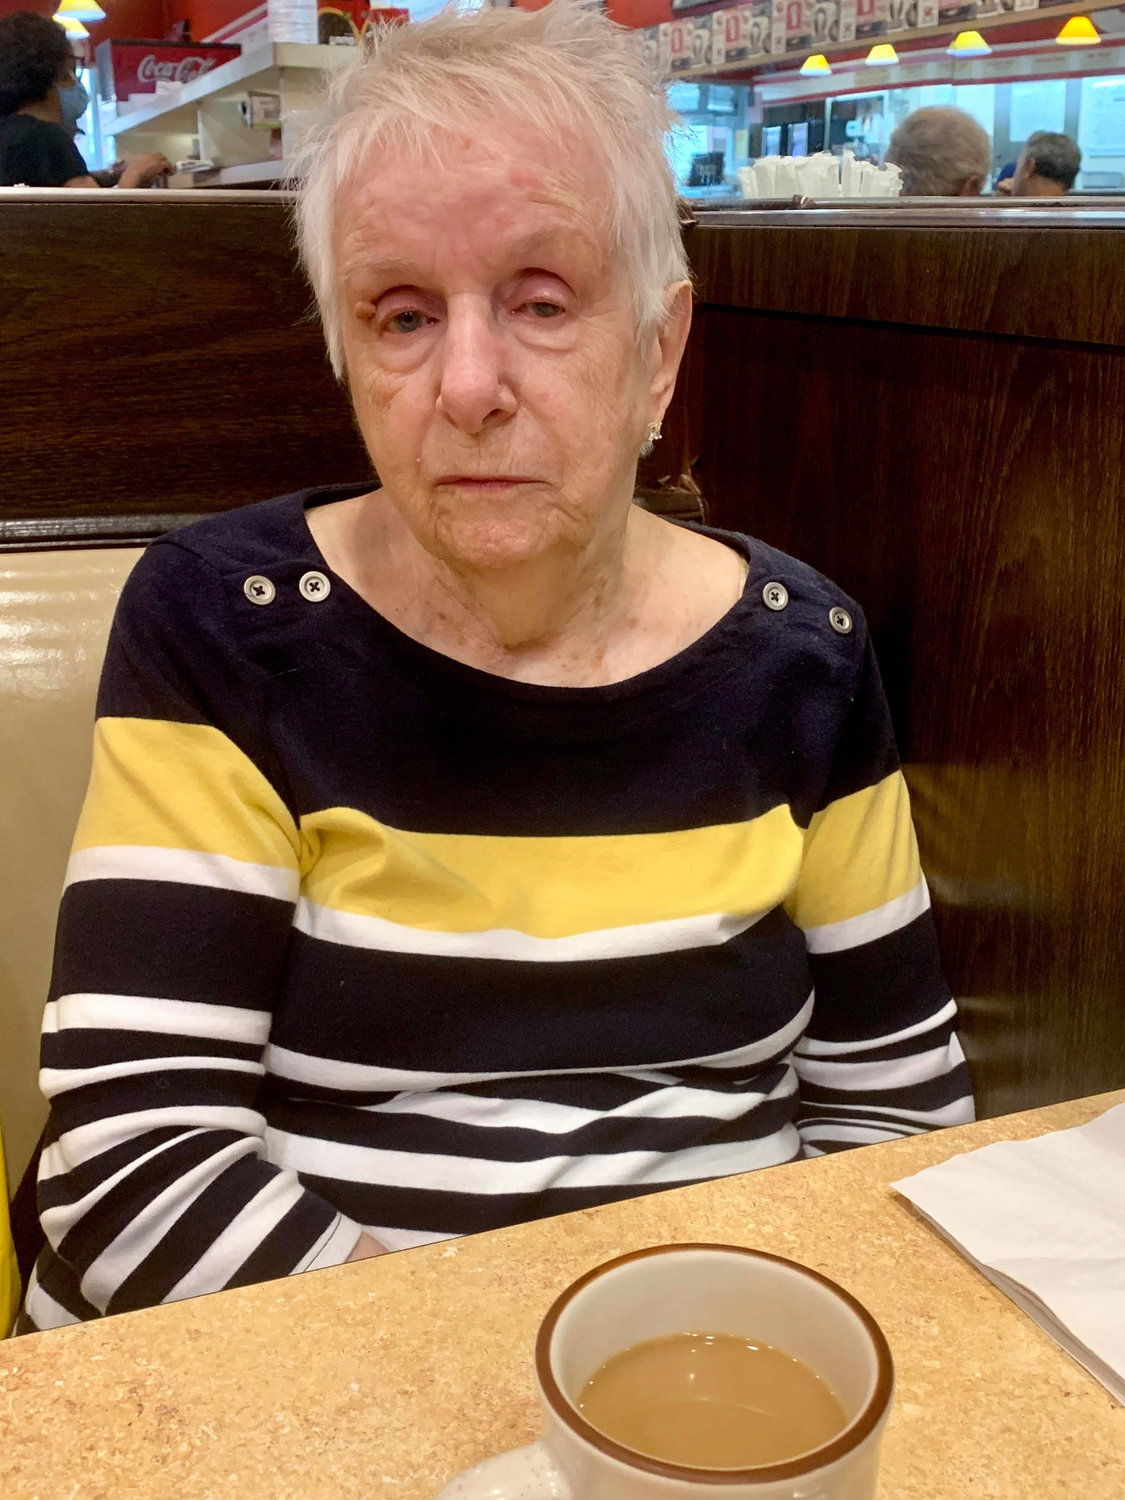 Doris Rykowski, 87, has been eating at Henry’s Confectionary for the past few days with her family because she cannot cook at home due to a lack of electricity.